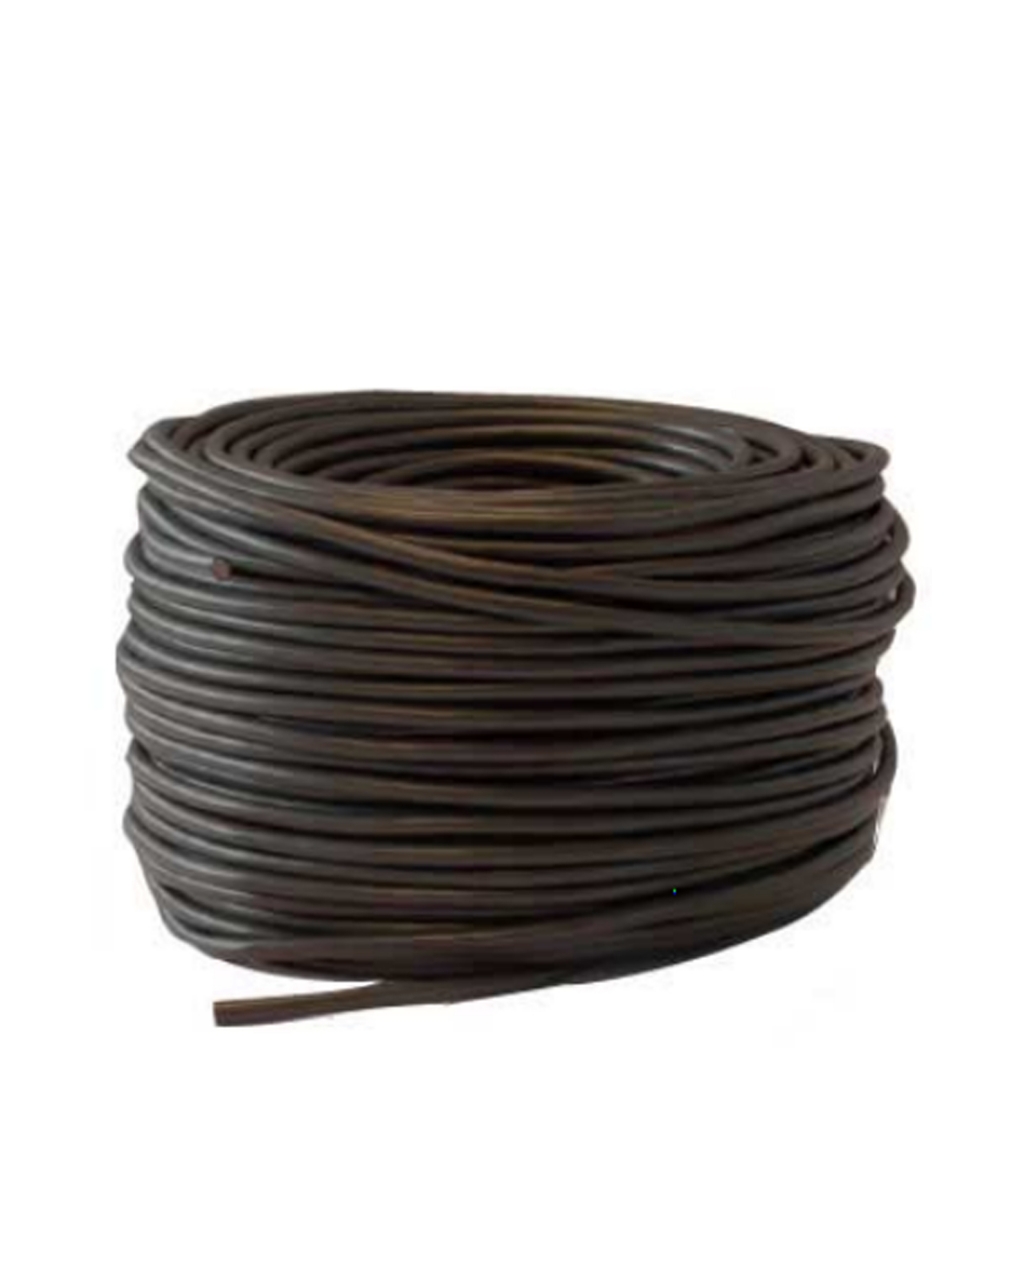 LBB 4116/00 –Installation cable, 100M (w/o connectors)